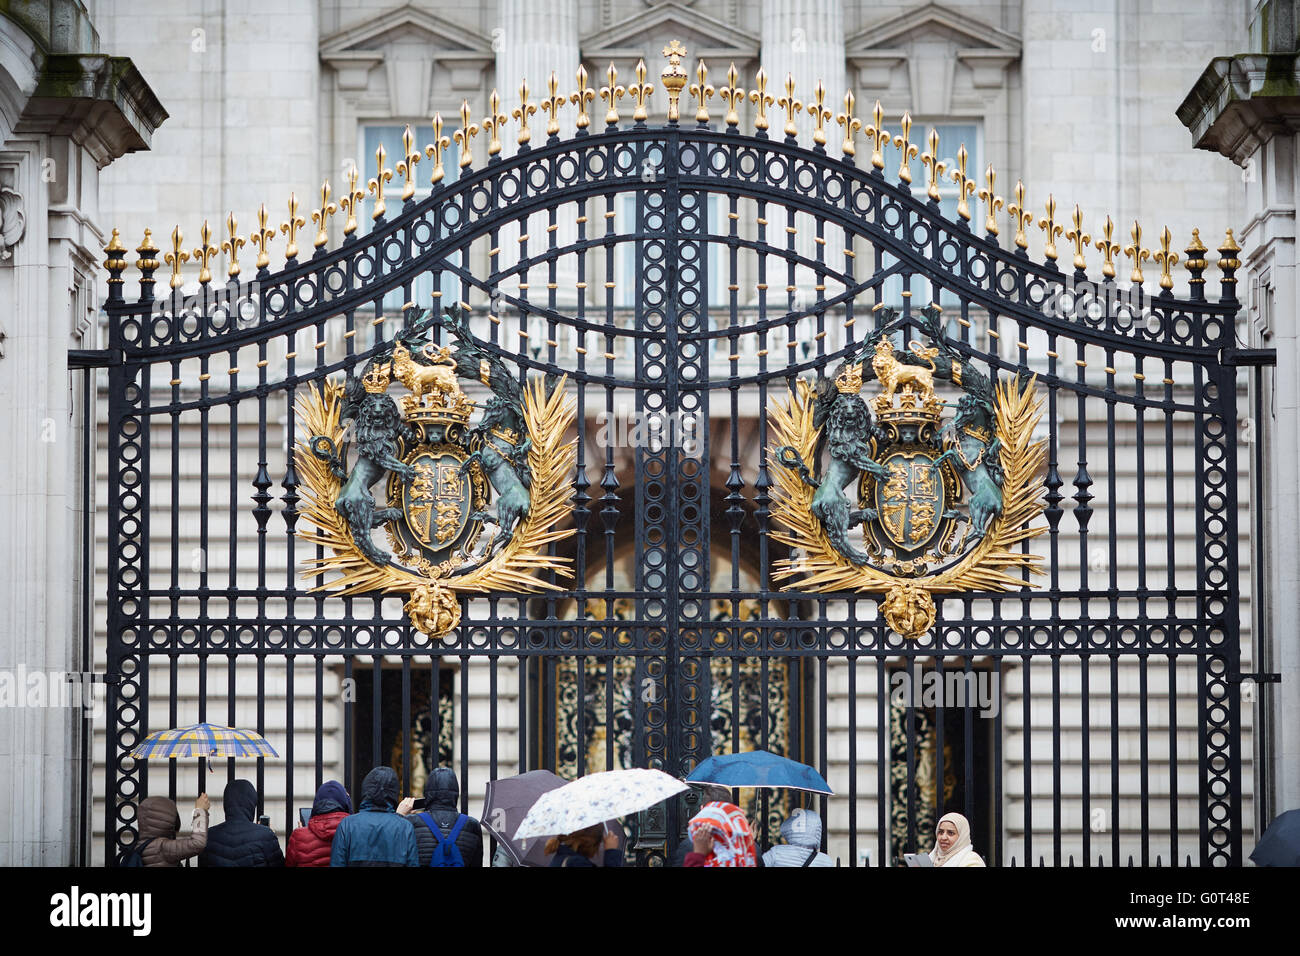 Gate to Buckingham Palace home of the Queen wrought iron Historic history important significant Quality deluxe luxury posh well Stock Photo